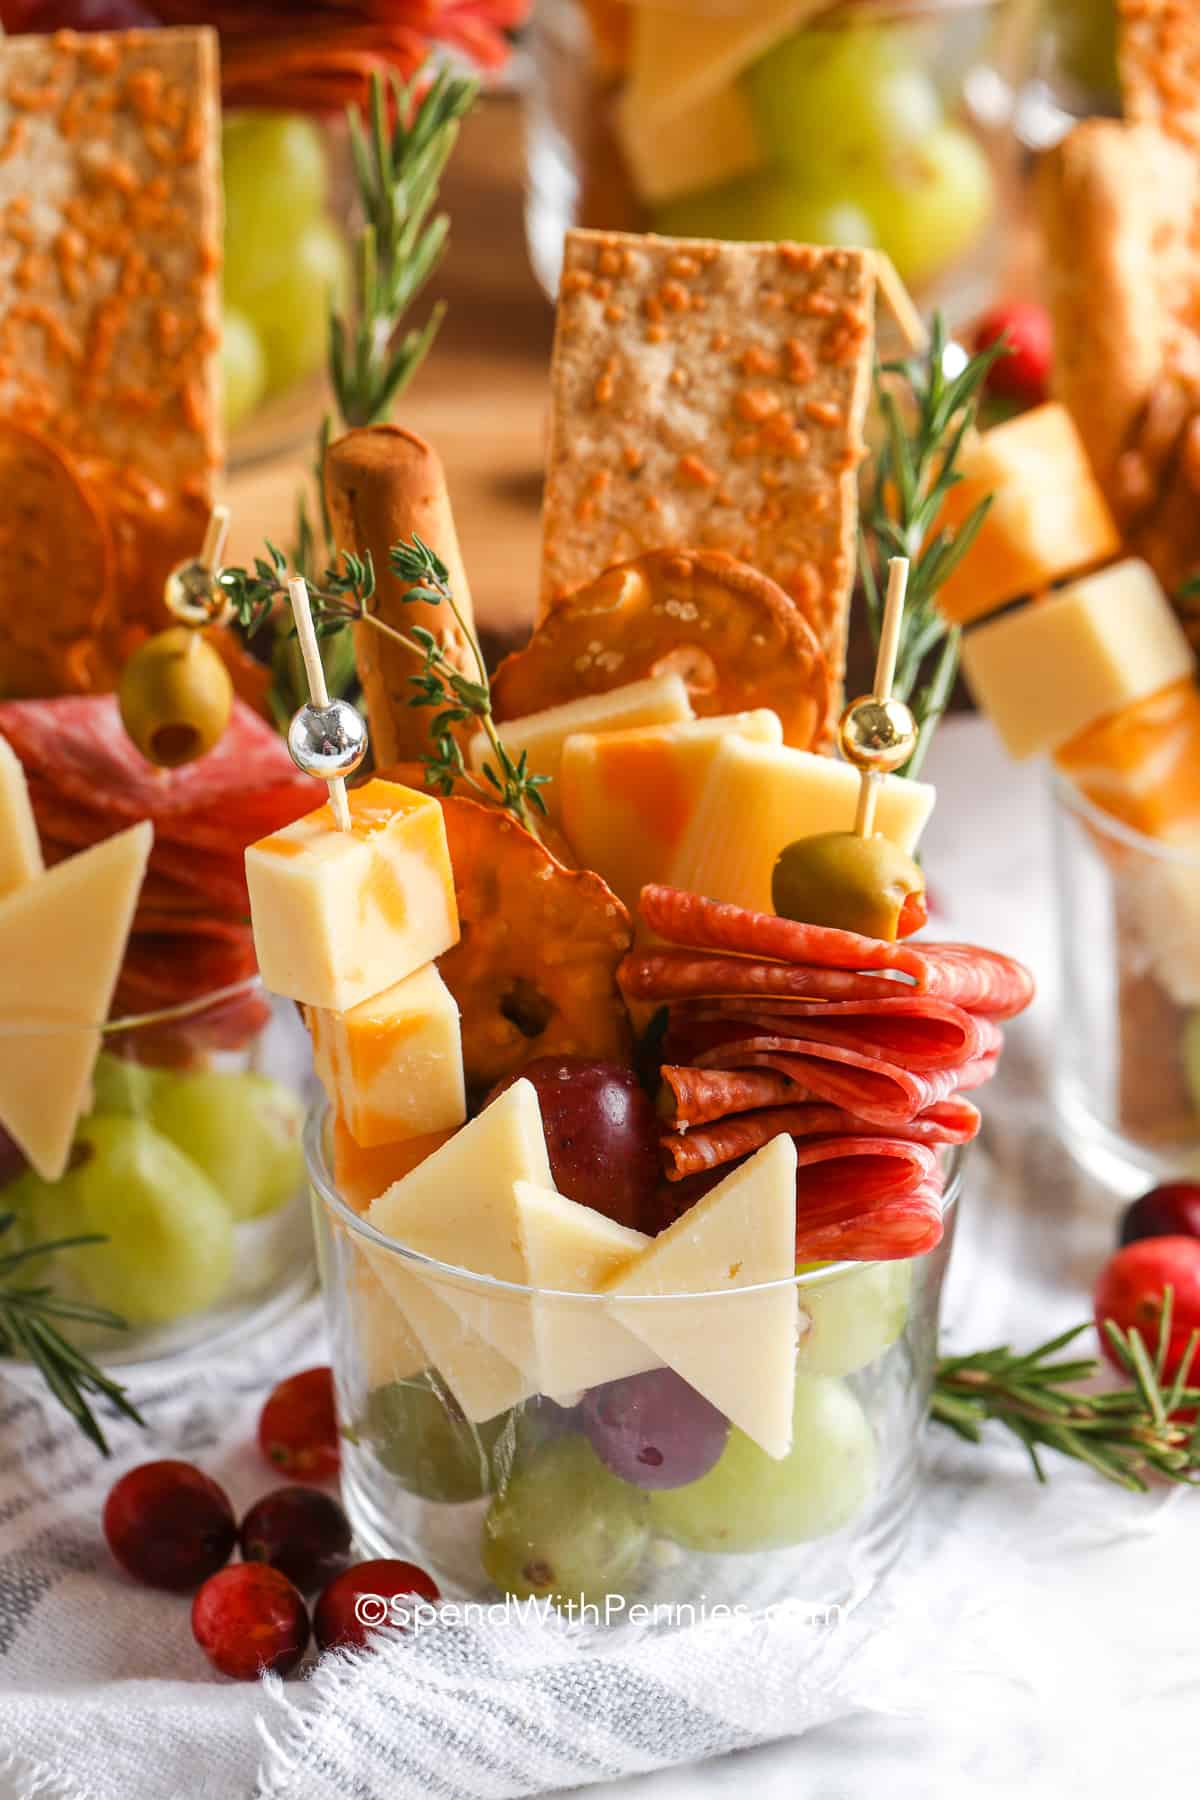 A different way to do a charcuterie board by putting the meat and cheese on a cocktail skewer and adding the ingredients to a plastic cup.